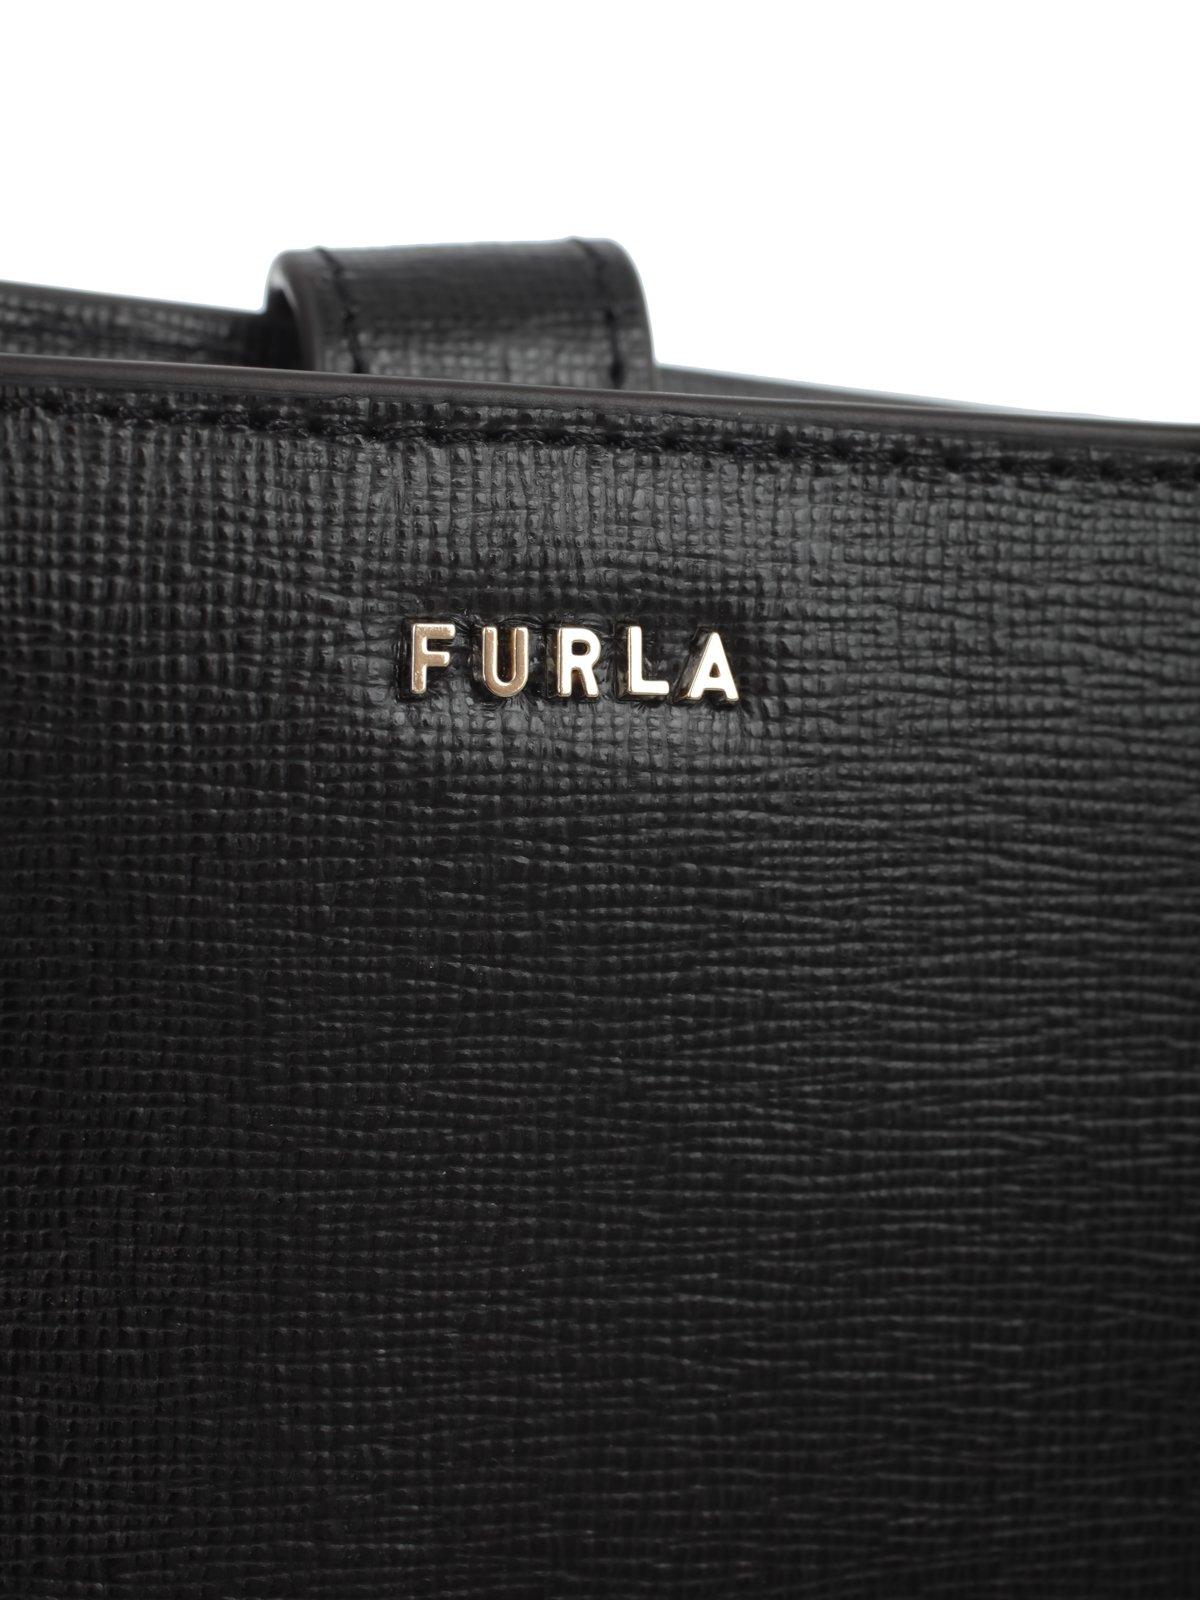 Furla Leather Logo Plaque Compact Wallet in Black - Lyst